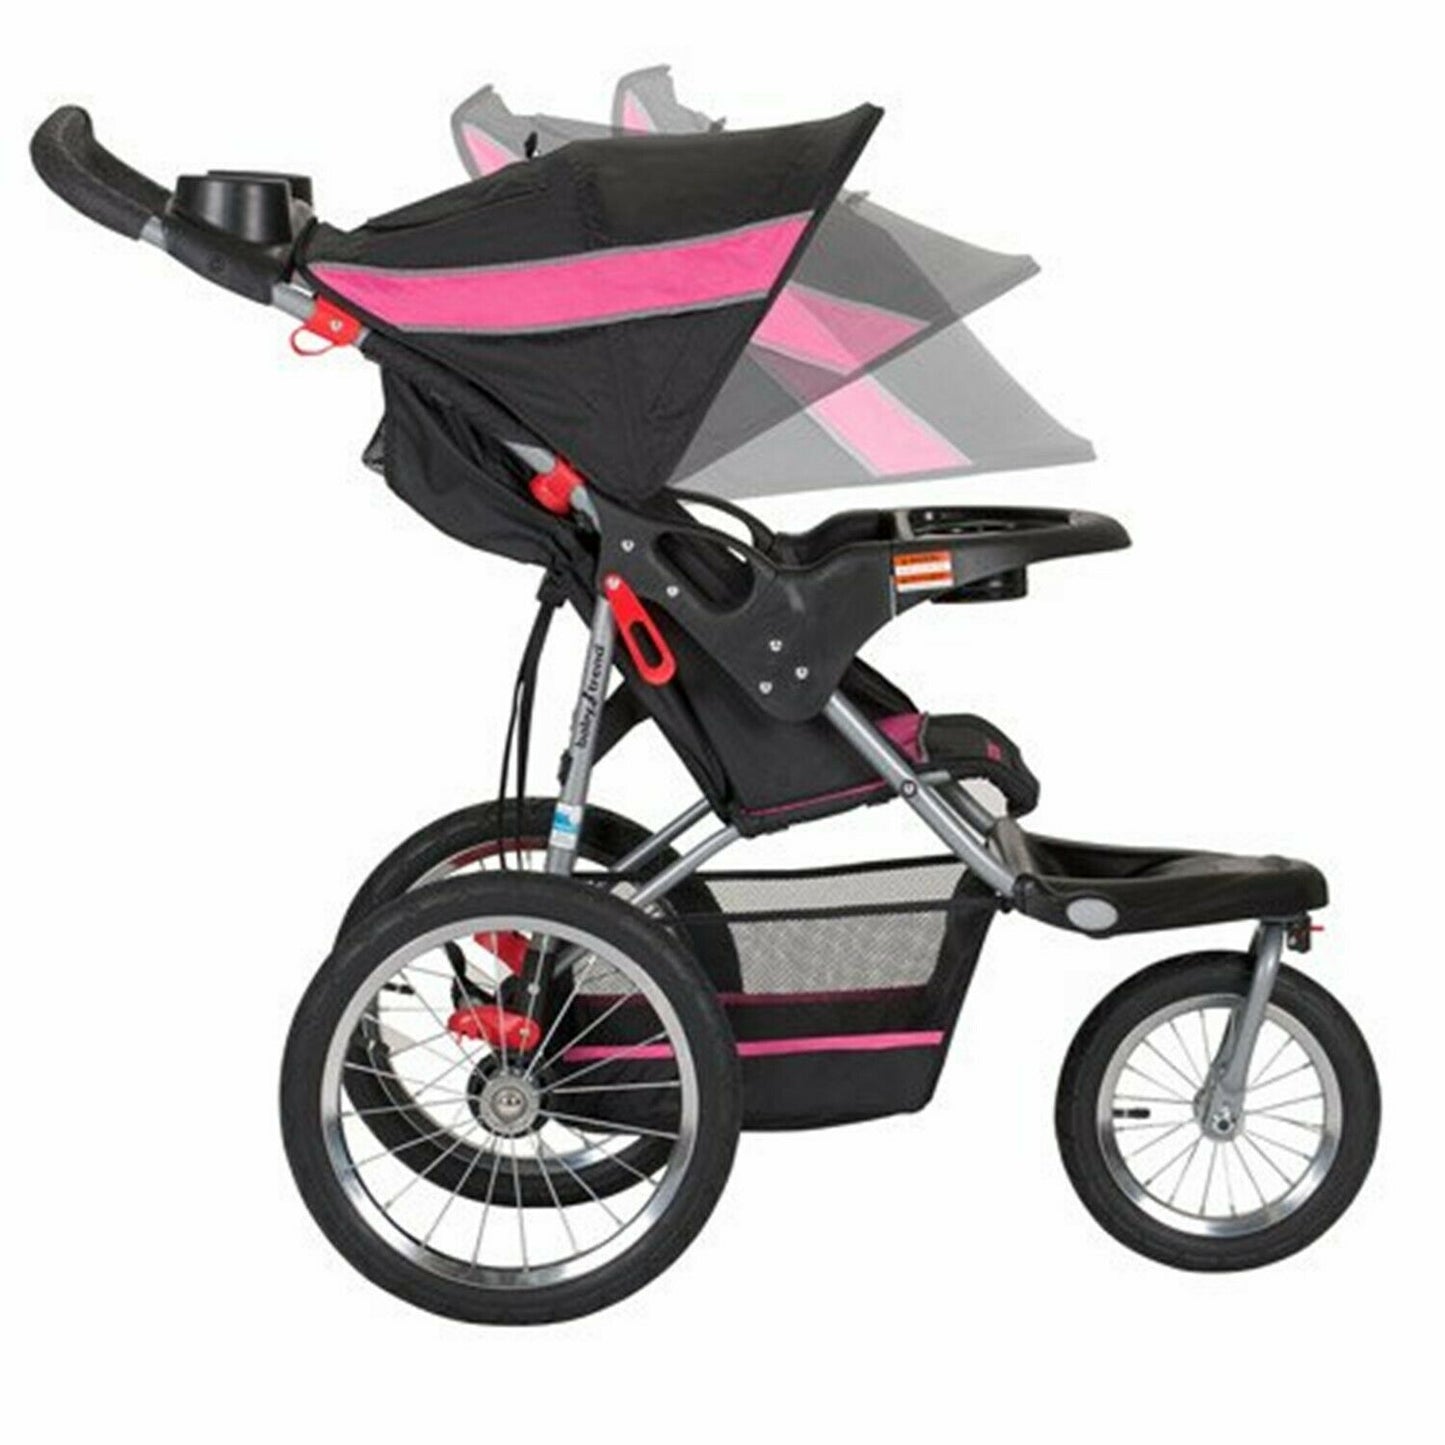 Smooth Ride Baby Stroller Jogging Travel System with Car Seat Playard Diaper Bag